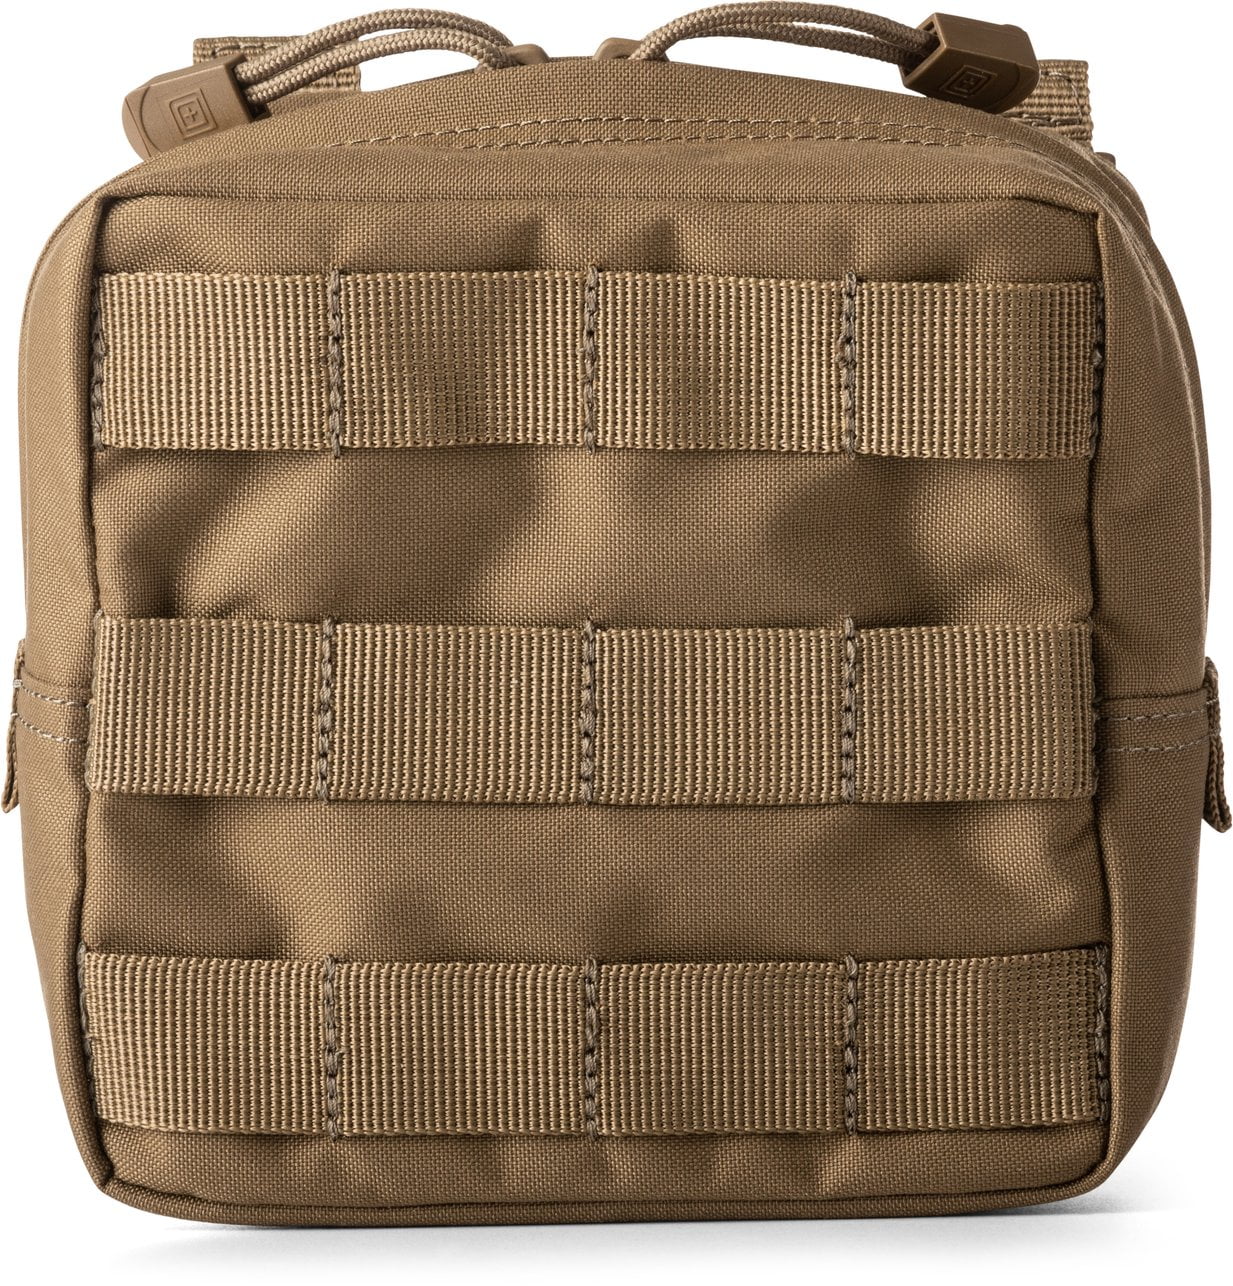 Style 58713 5.11 Tactical 6x6 Military MOLLE Lightweight Nylon Pouch Gear Bag 